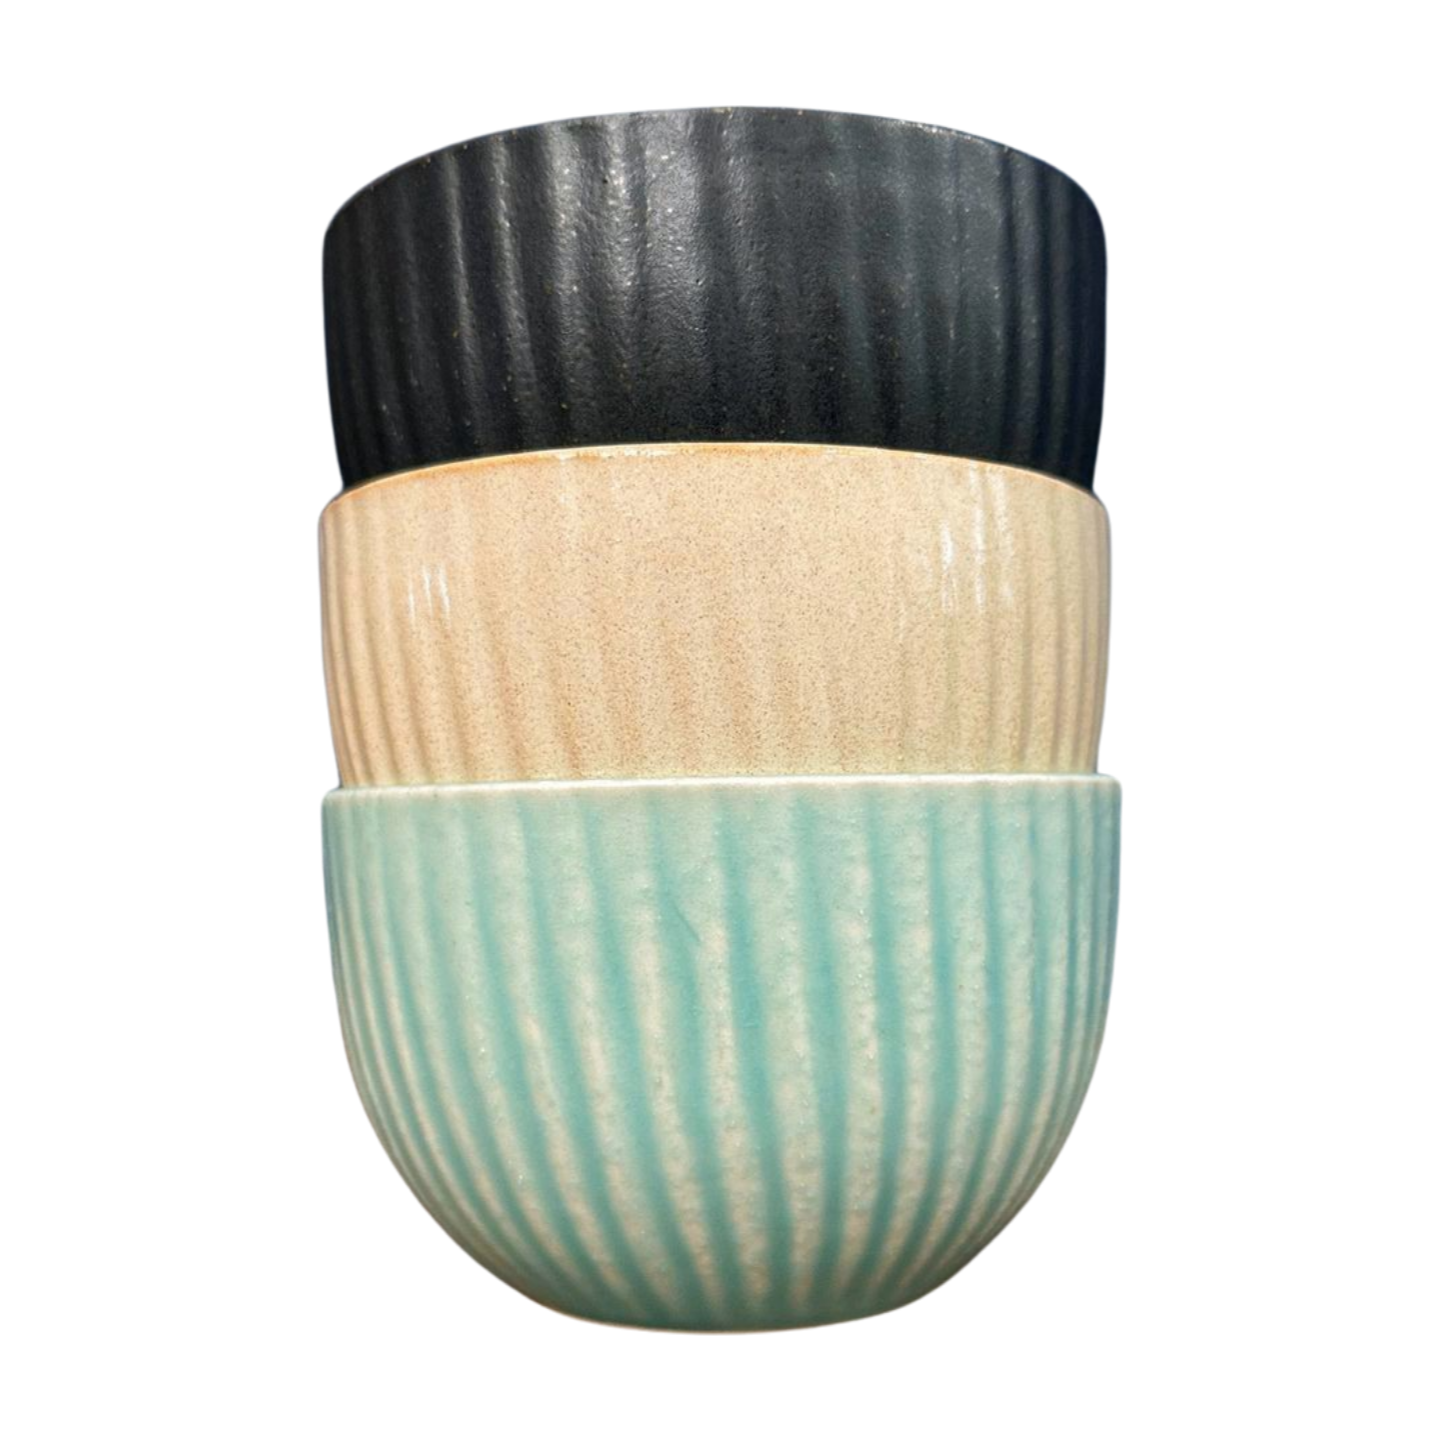 Set of three Japanese Rice Bowls, stacked. Shown in three colors: black, ivory, and aqua.